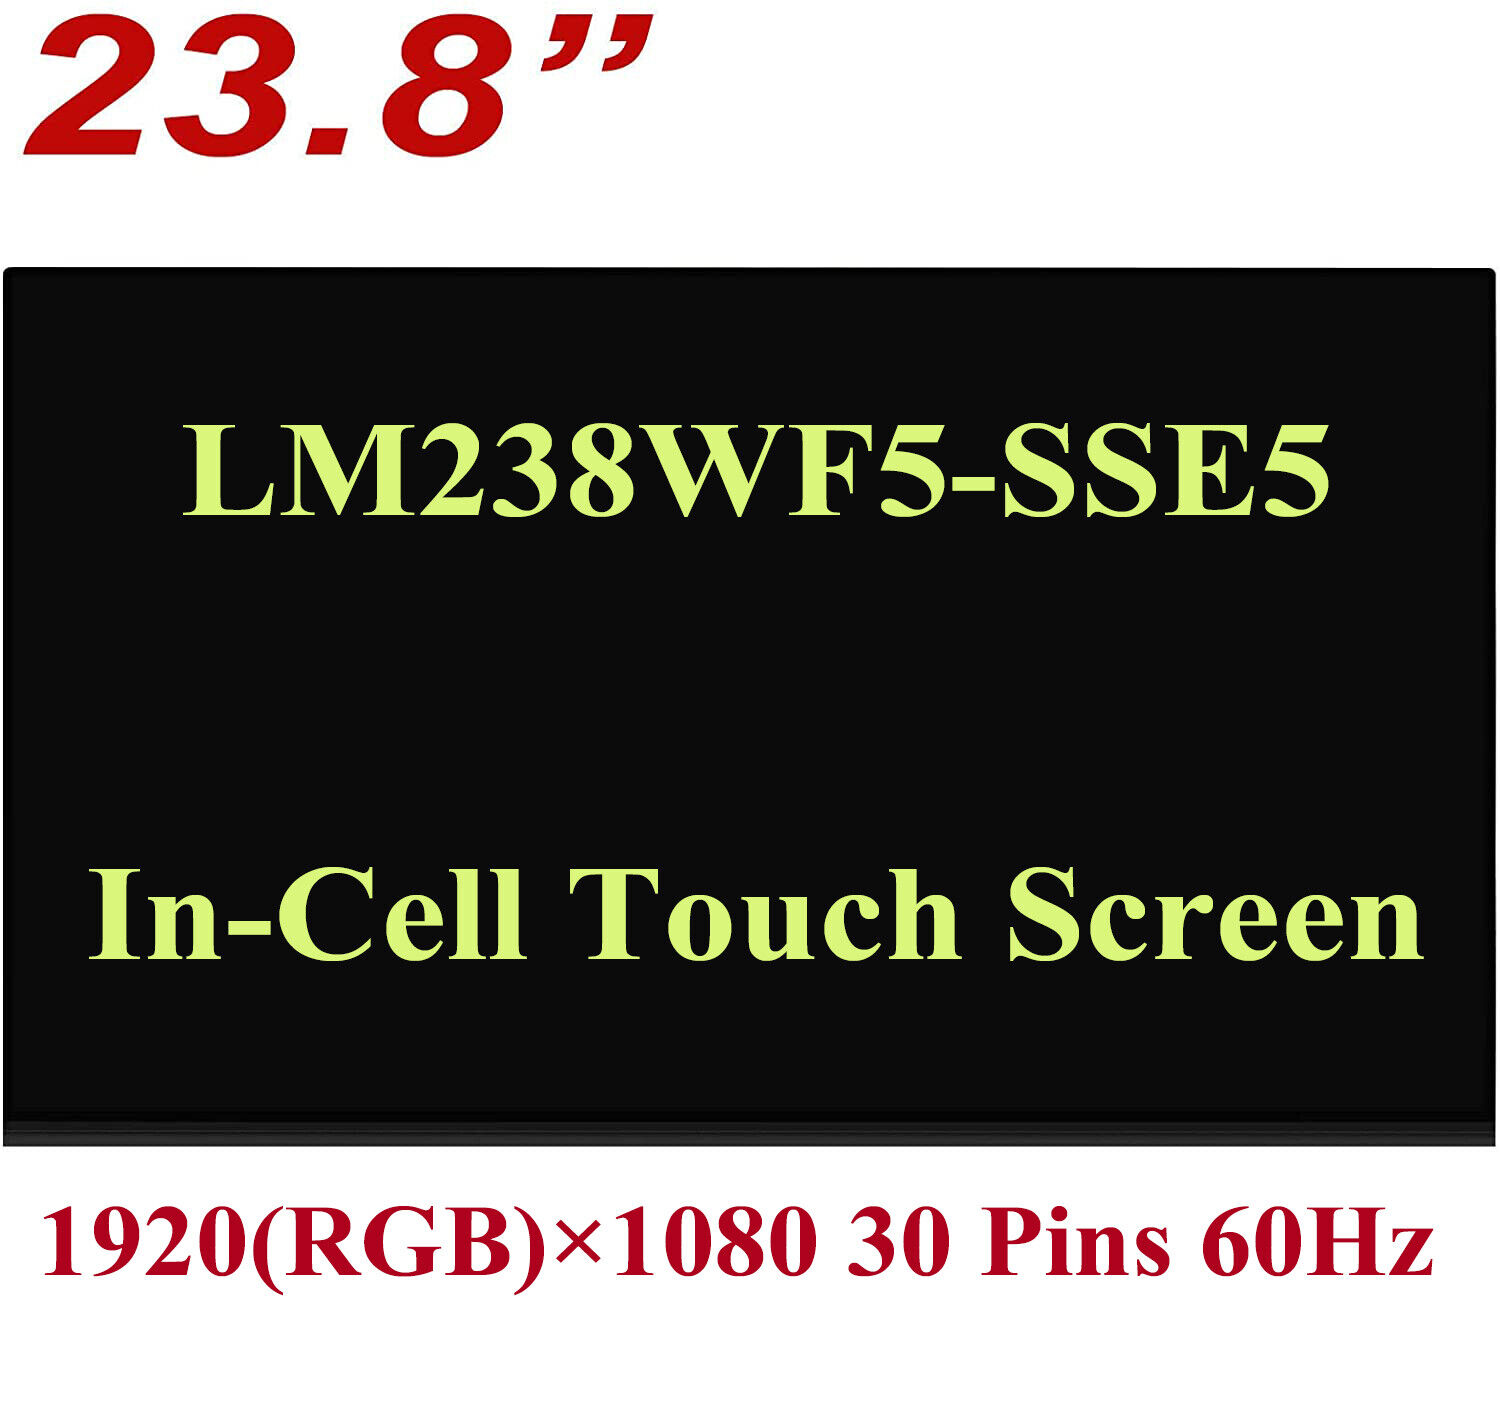 LM238WF5(SS)(E5) LM238WF5-SSE5 Touch Screen Replacement Panel LCD LED Display A+